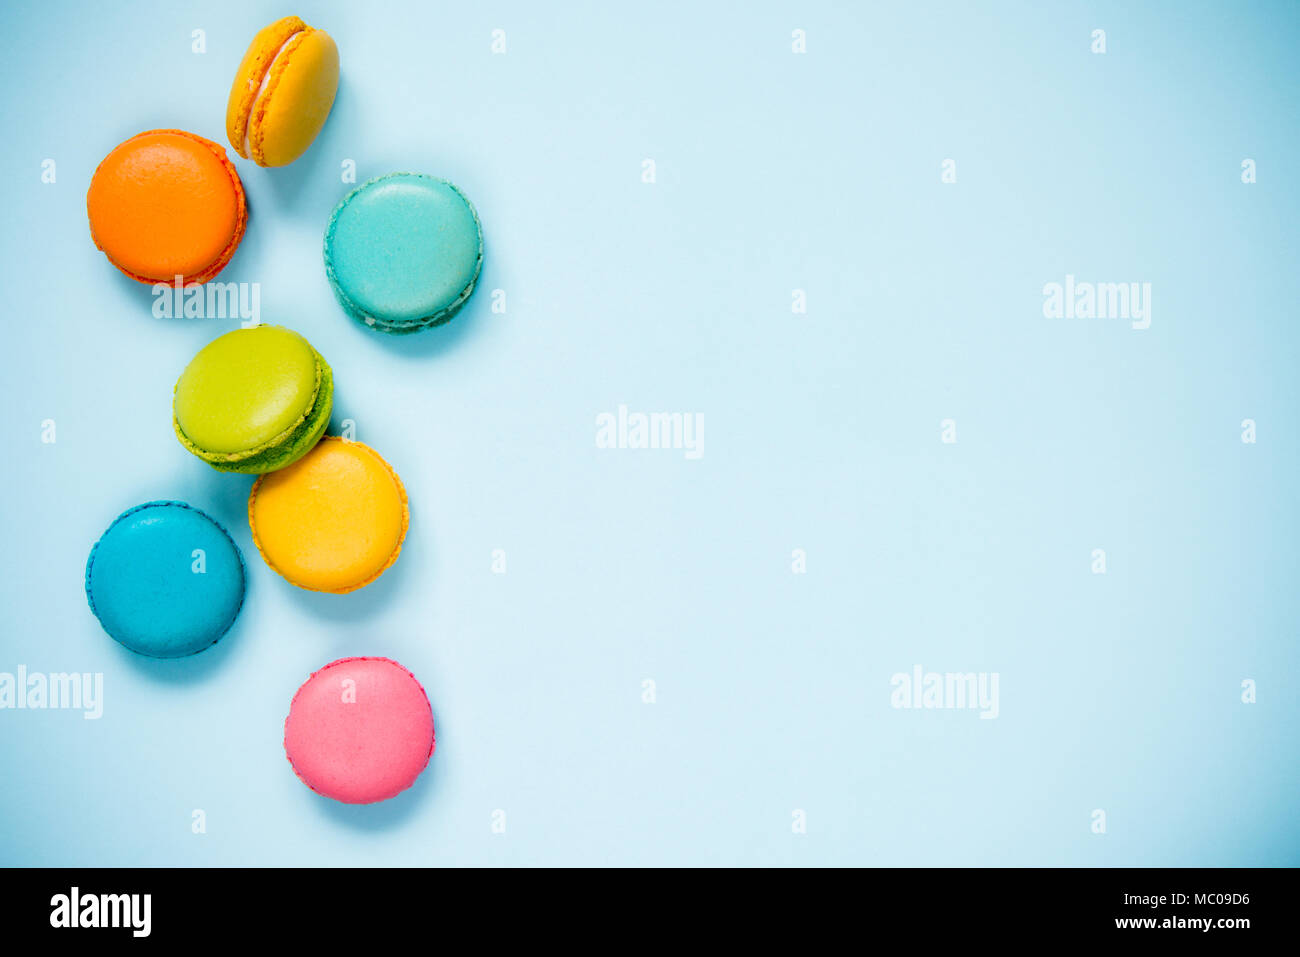 Colorful macaroons arranged over blue background. Copy space. Stock Photo